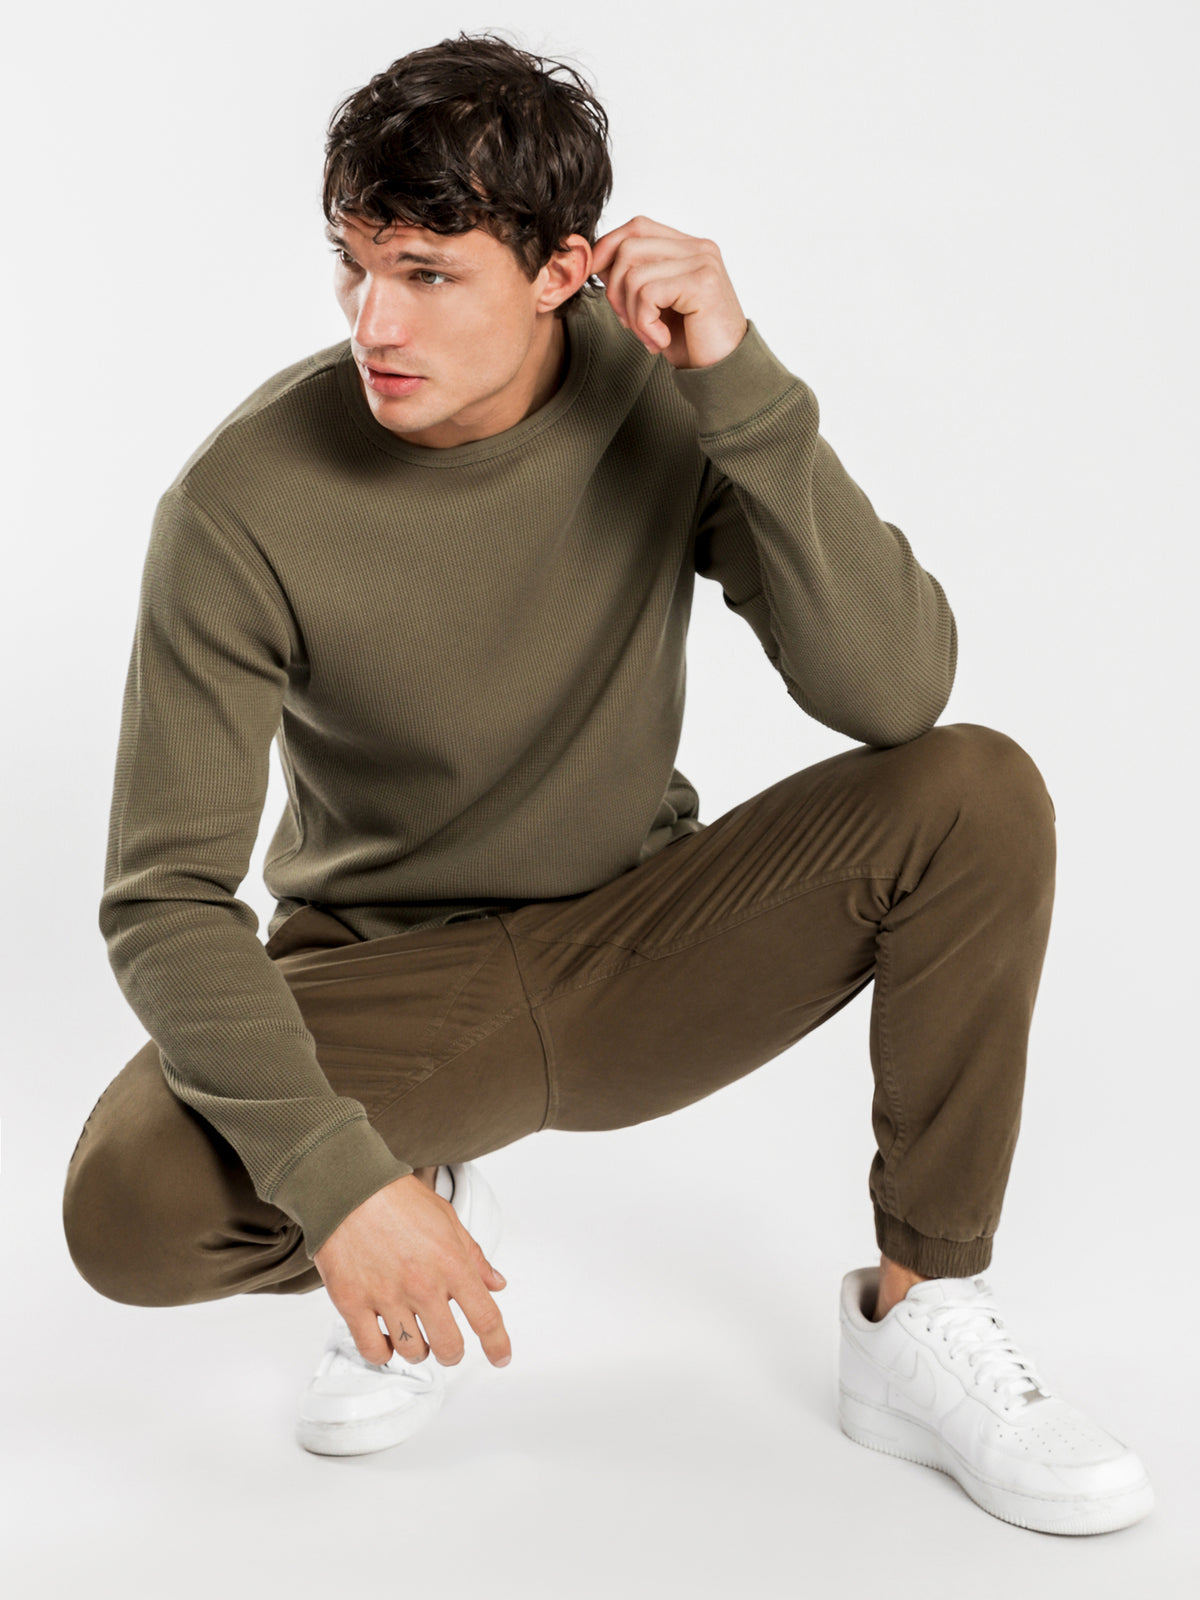 Boden Joggers in Olive Green